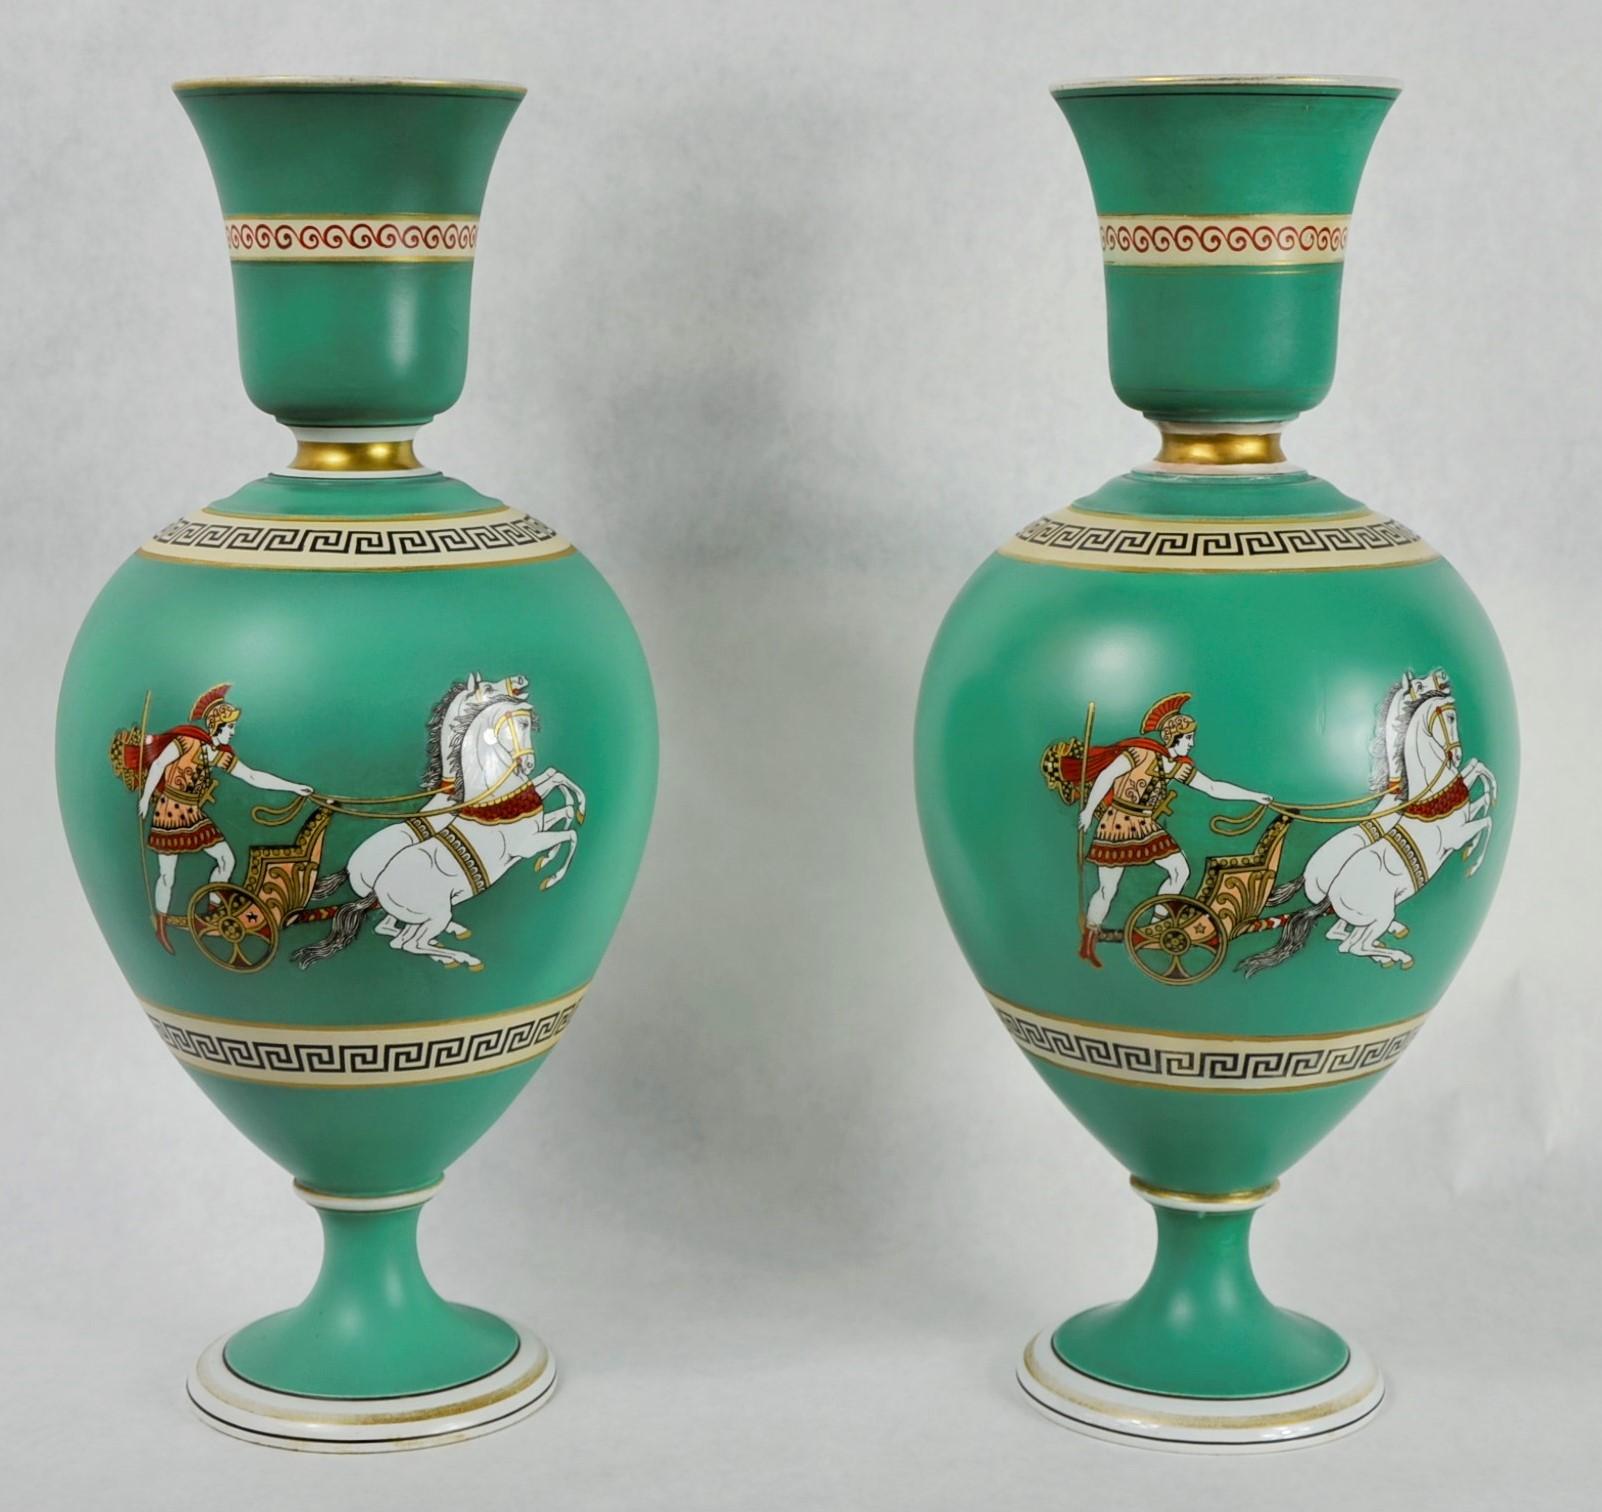 Offered is a pair of signed F & R Pratt Earthenware Grecian or Roman themed Greek key vases or urns. This pair of urns or vases are in impeccable condition and the modern clean Greek key design and Grecian theme is so on trend. The shades of green